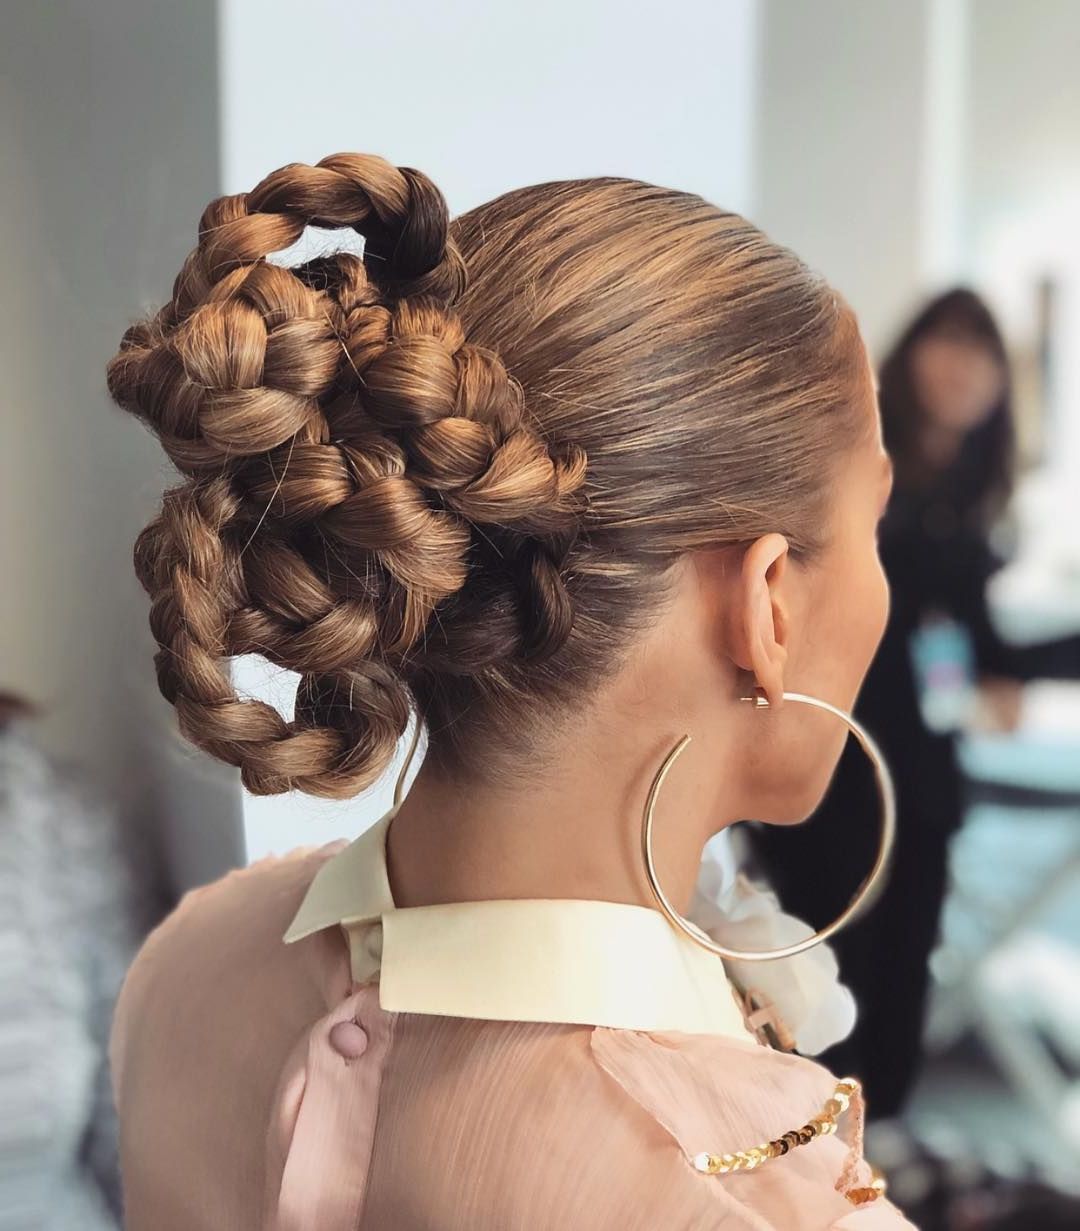 Most Current Braided Updo For Long Hair Regarding 20 Braided Updo Hairstyles – Pictures Of Pretty Updos With Braids (Gallery 11 of 15)